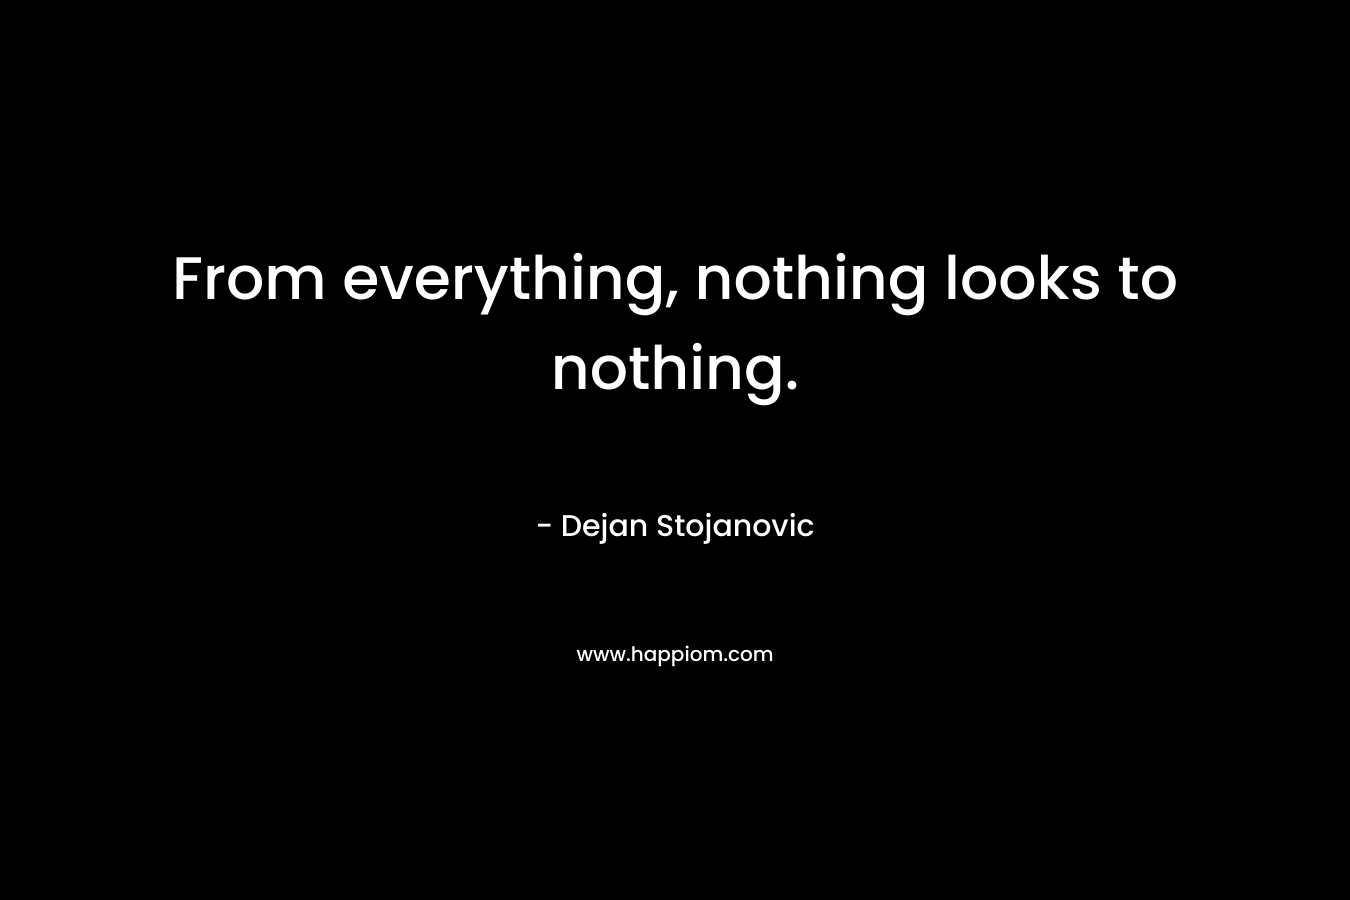 From everything, nothing looks to nothing.